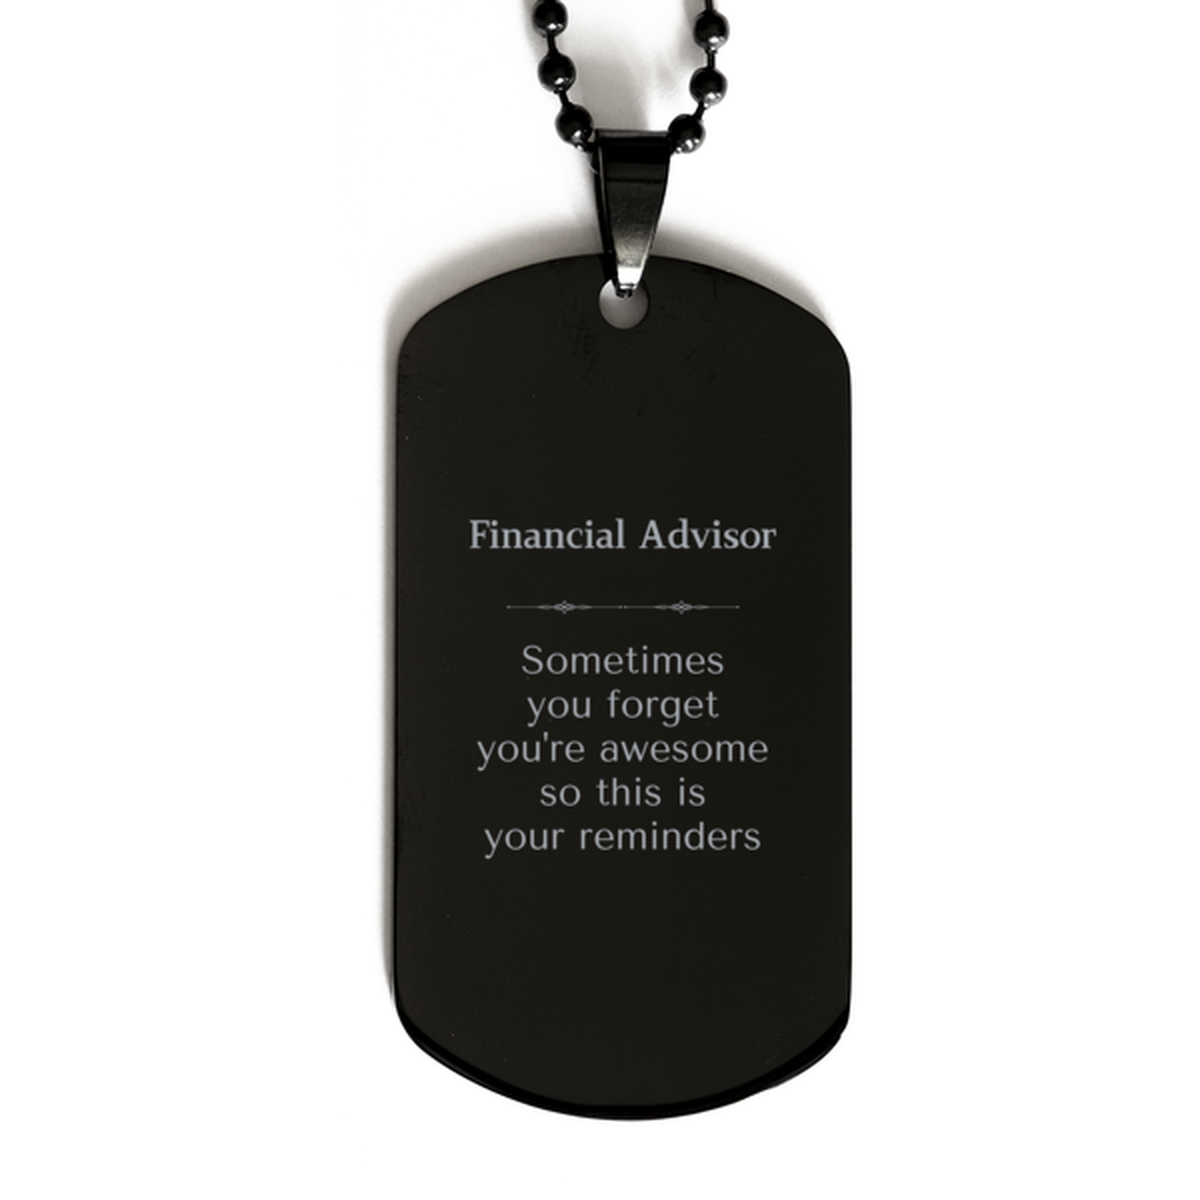 Sentimental Financial Advisor Black Dog Tag, Financial Advisor Sometimes you forget you're awesome so this is your reminders, Graduation Christmas Birthday Gifts for Financial Advisor, Men, Women, Coworkers